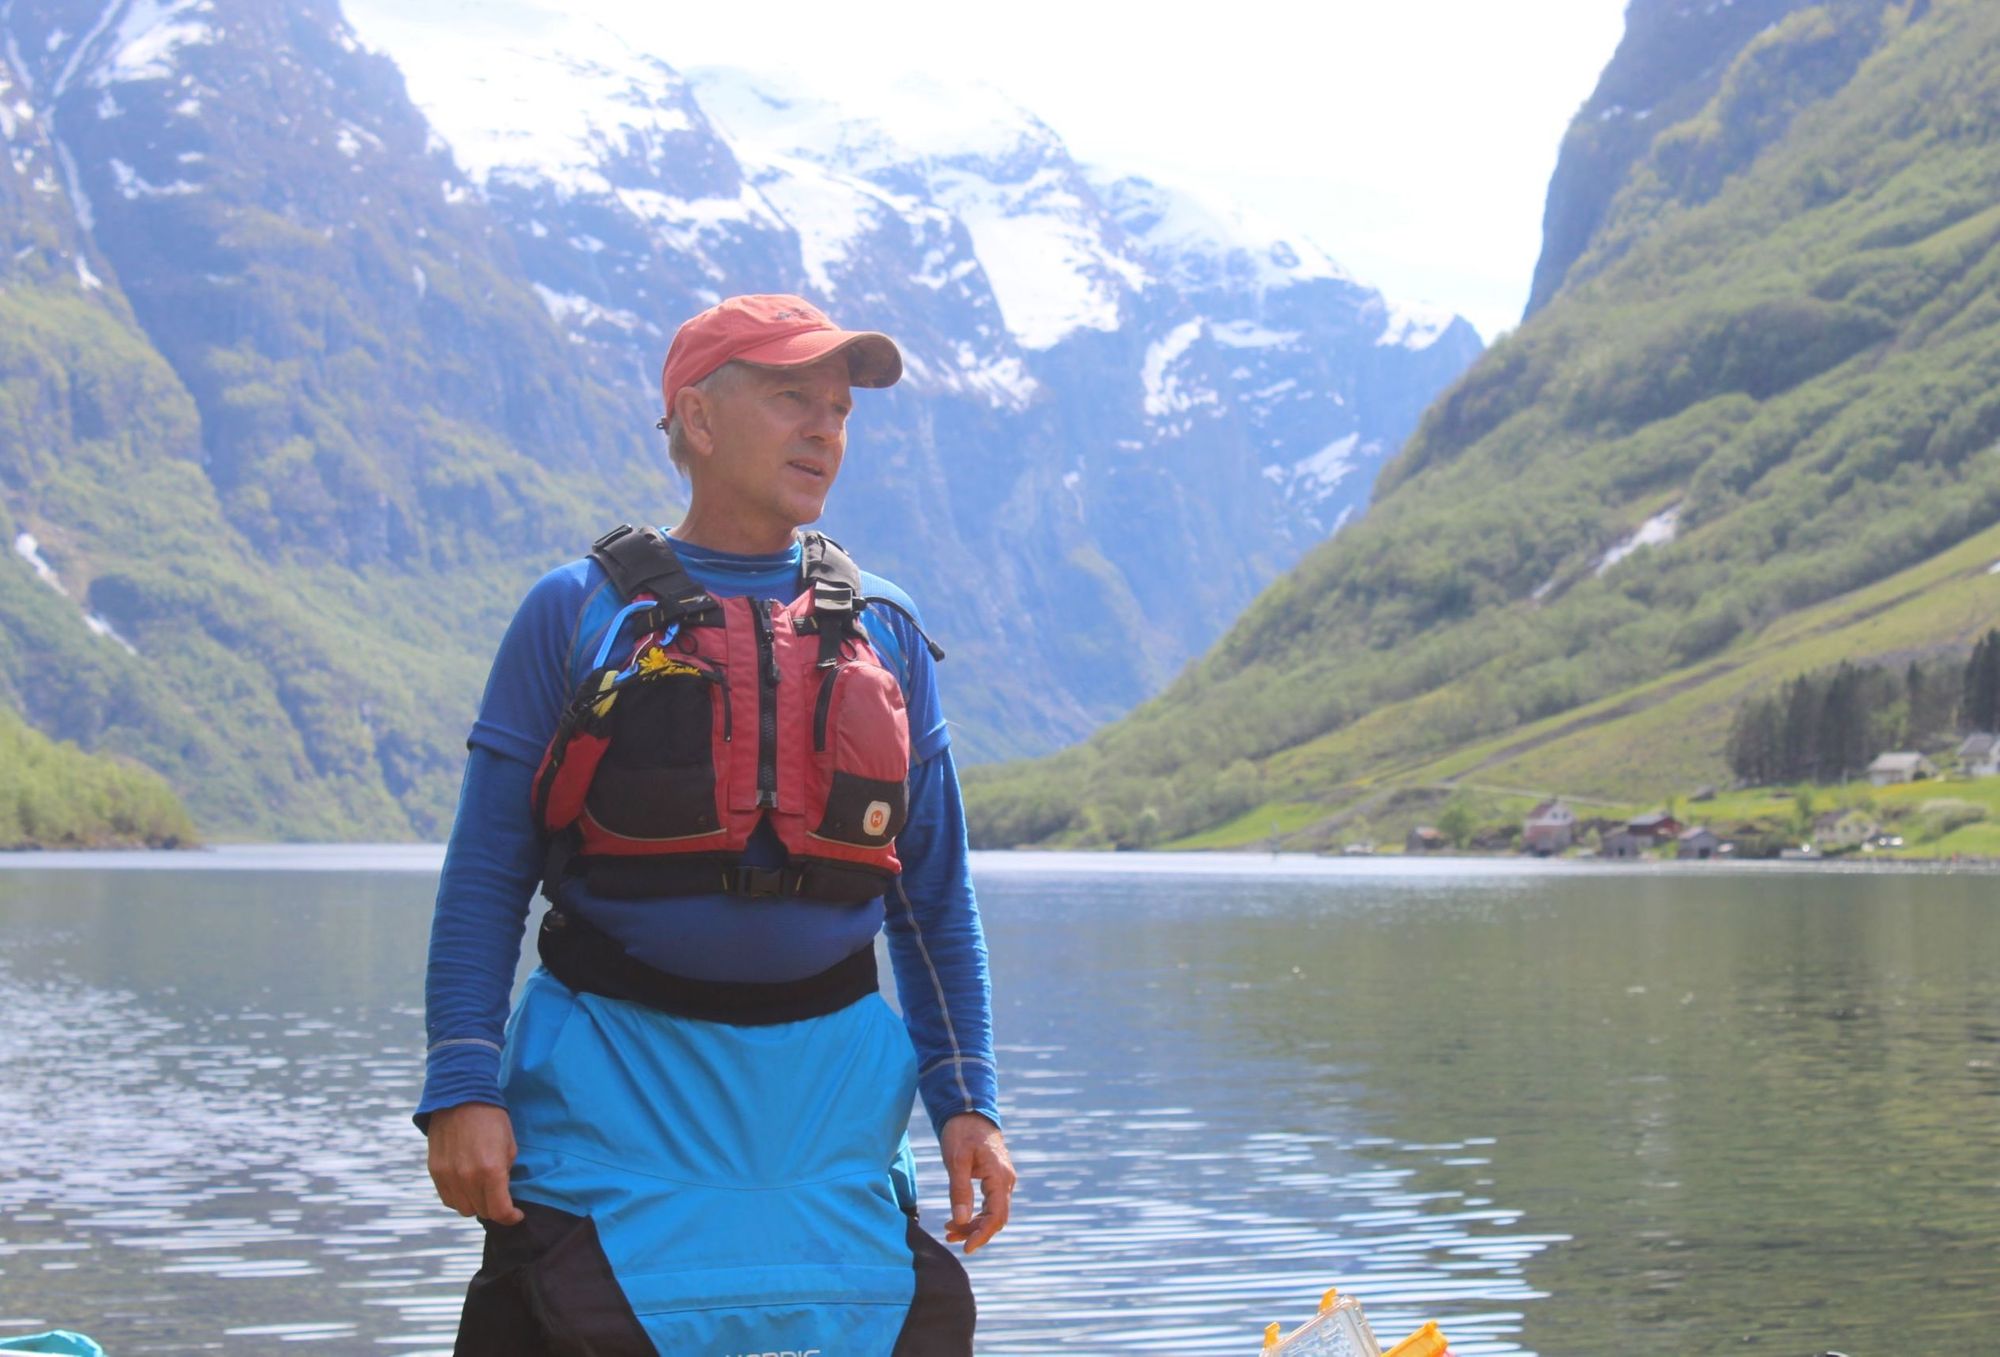 Jan Neilsen has been guiding on the fjords of Western Norway since 1998.